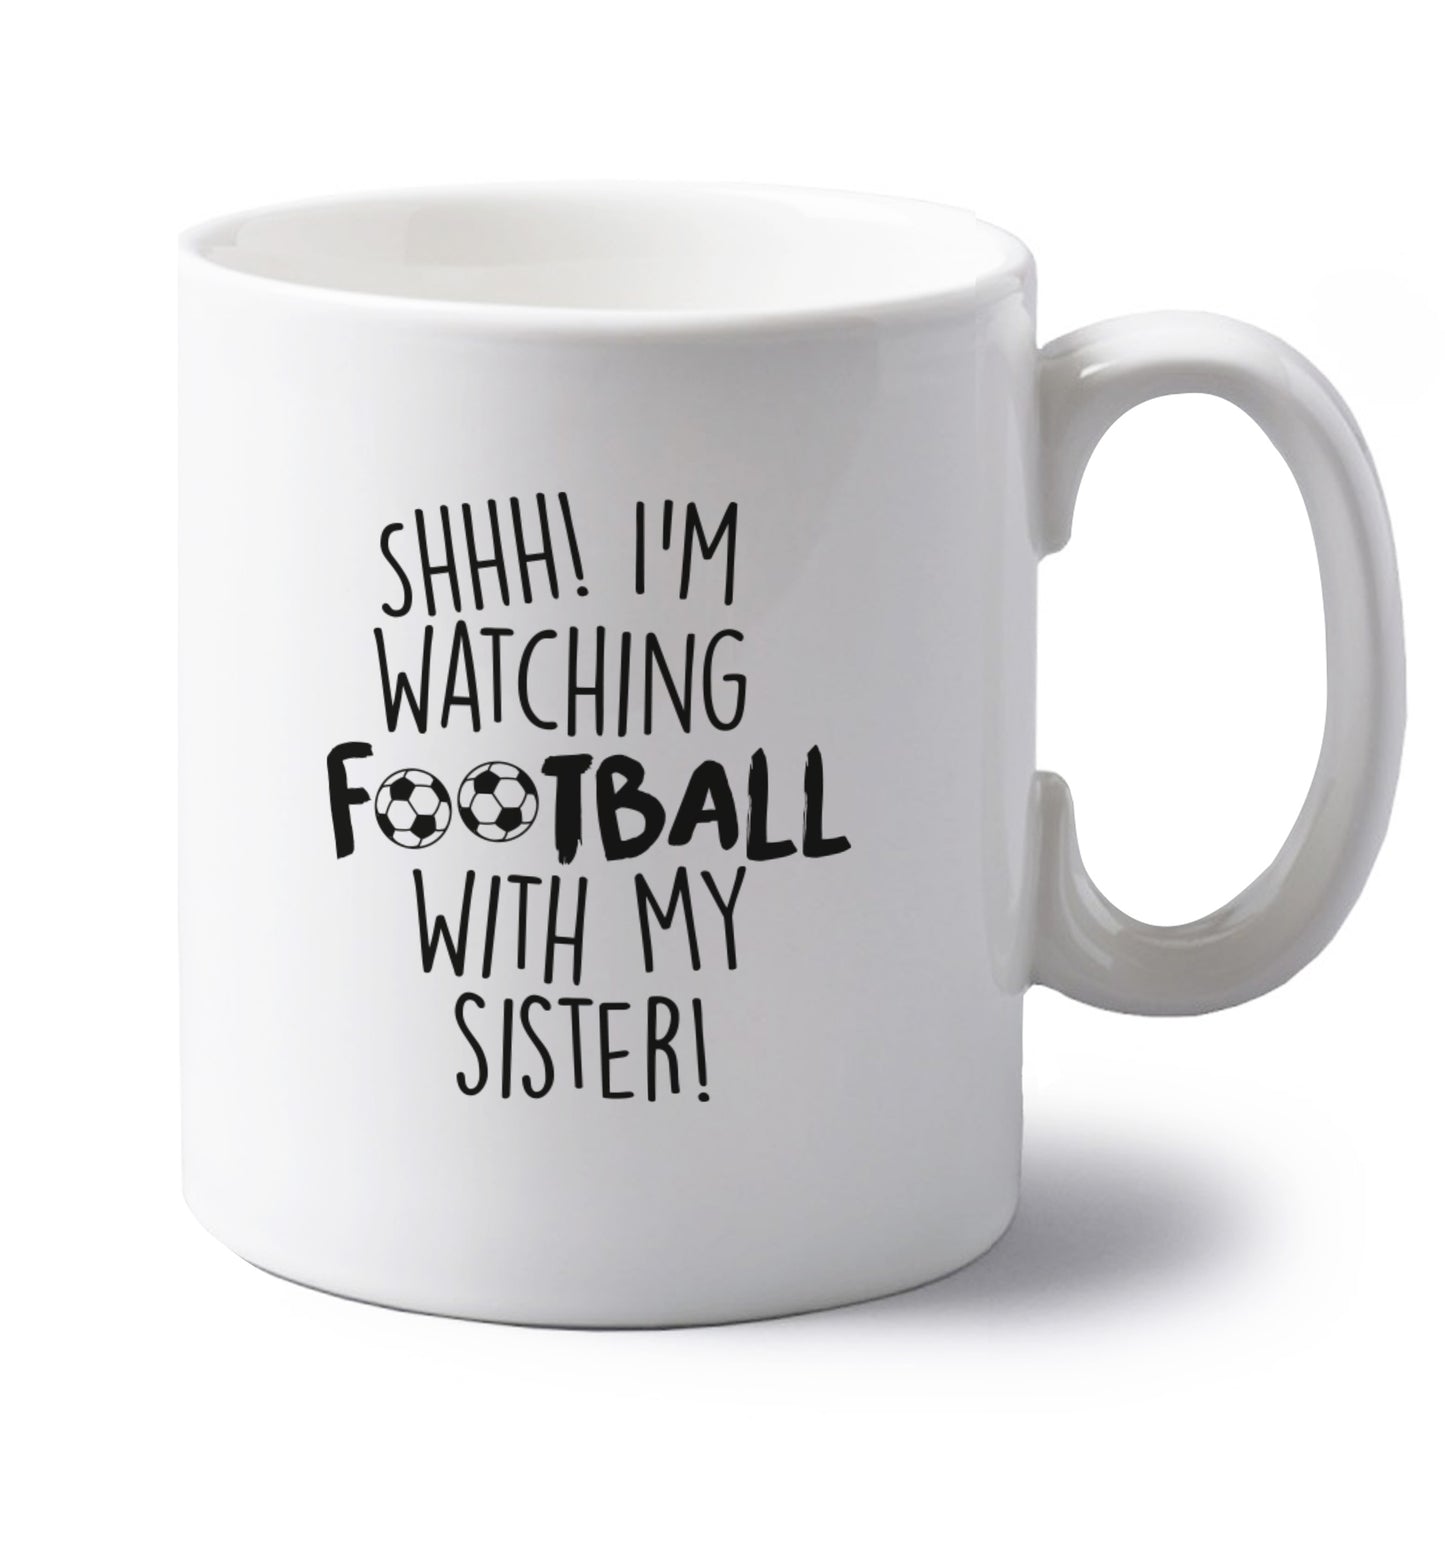 Shhh I'm watching football with my sister left handed white ceramic mug 